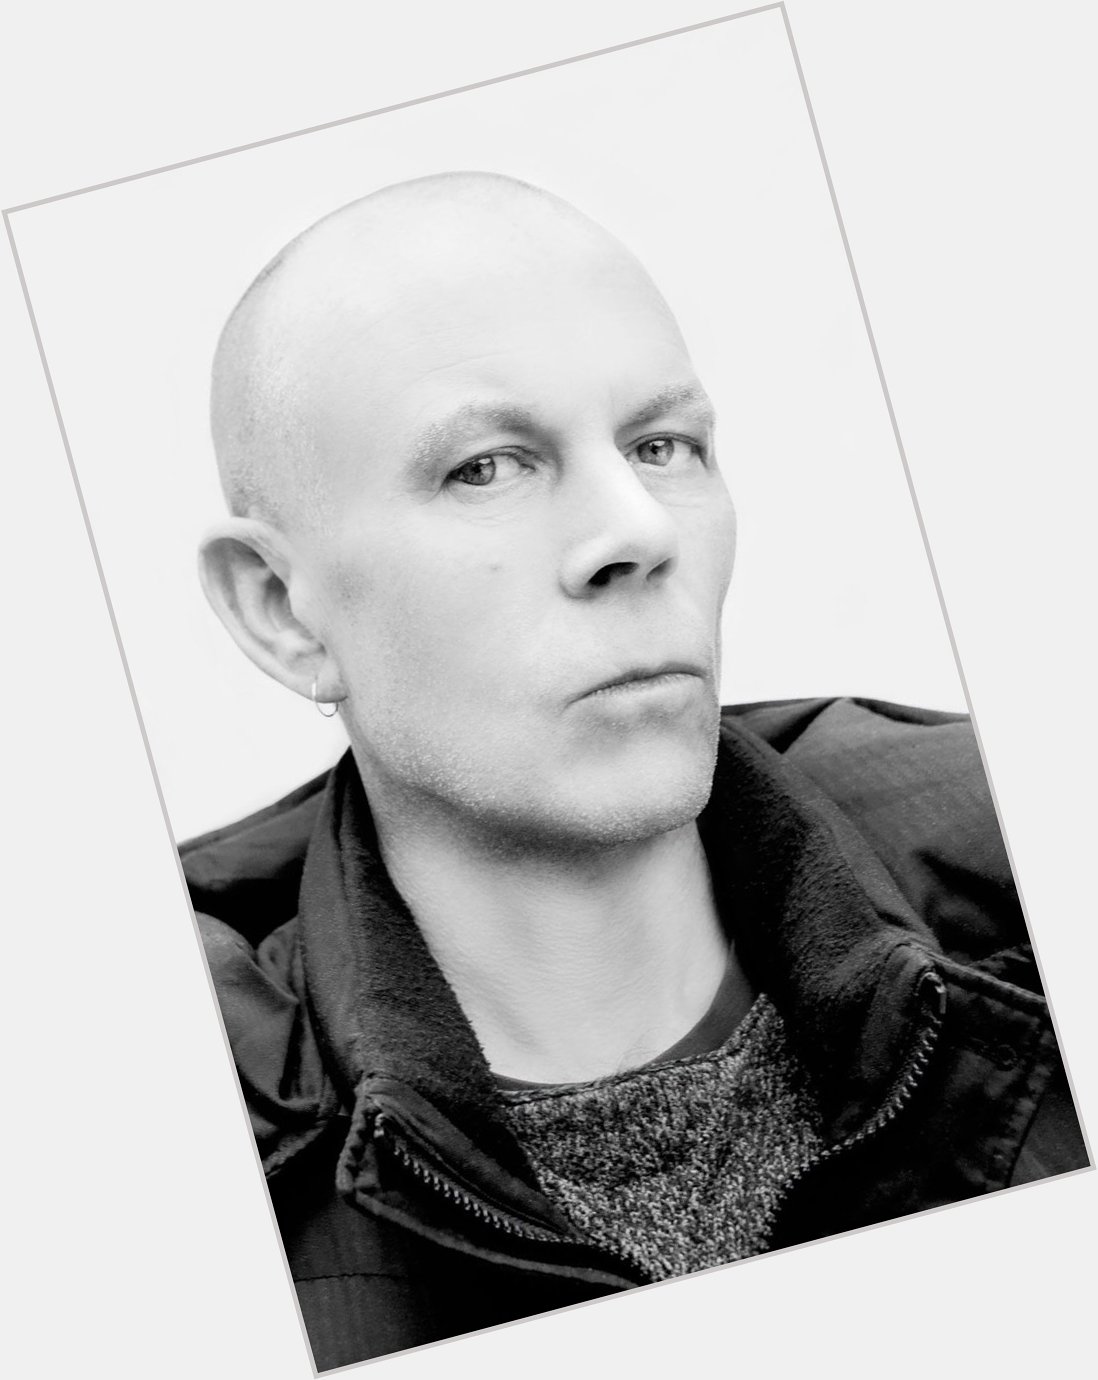 Happy Birthday to Vince Clarke, founding member of Depeche Mode, Yazoo, and Erasure, born this day in 1960! 